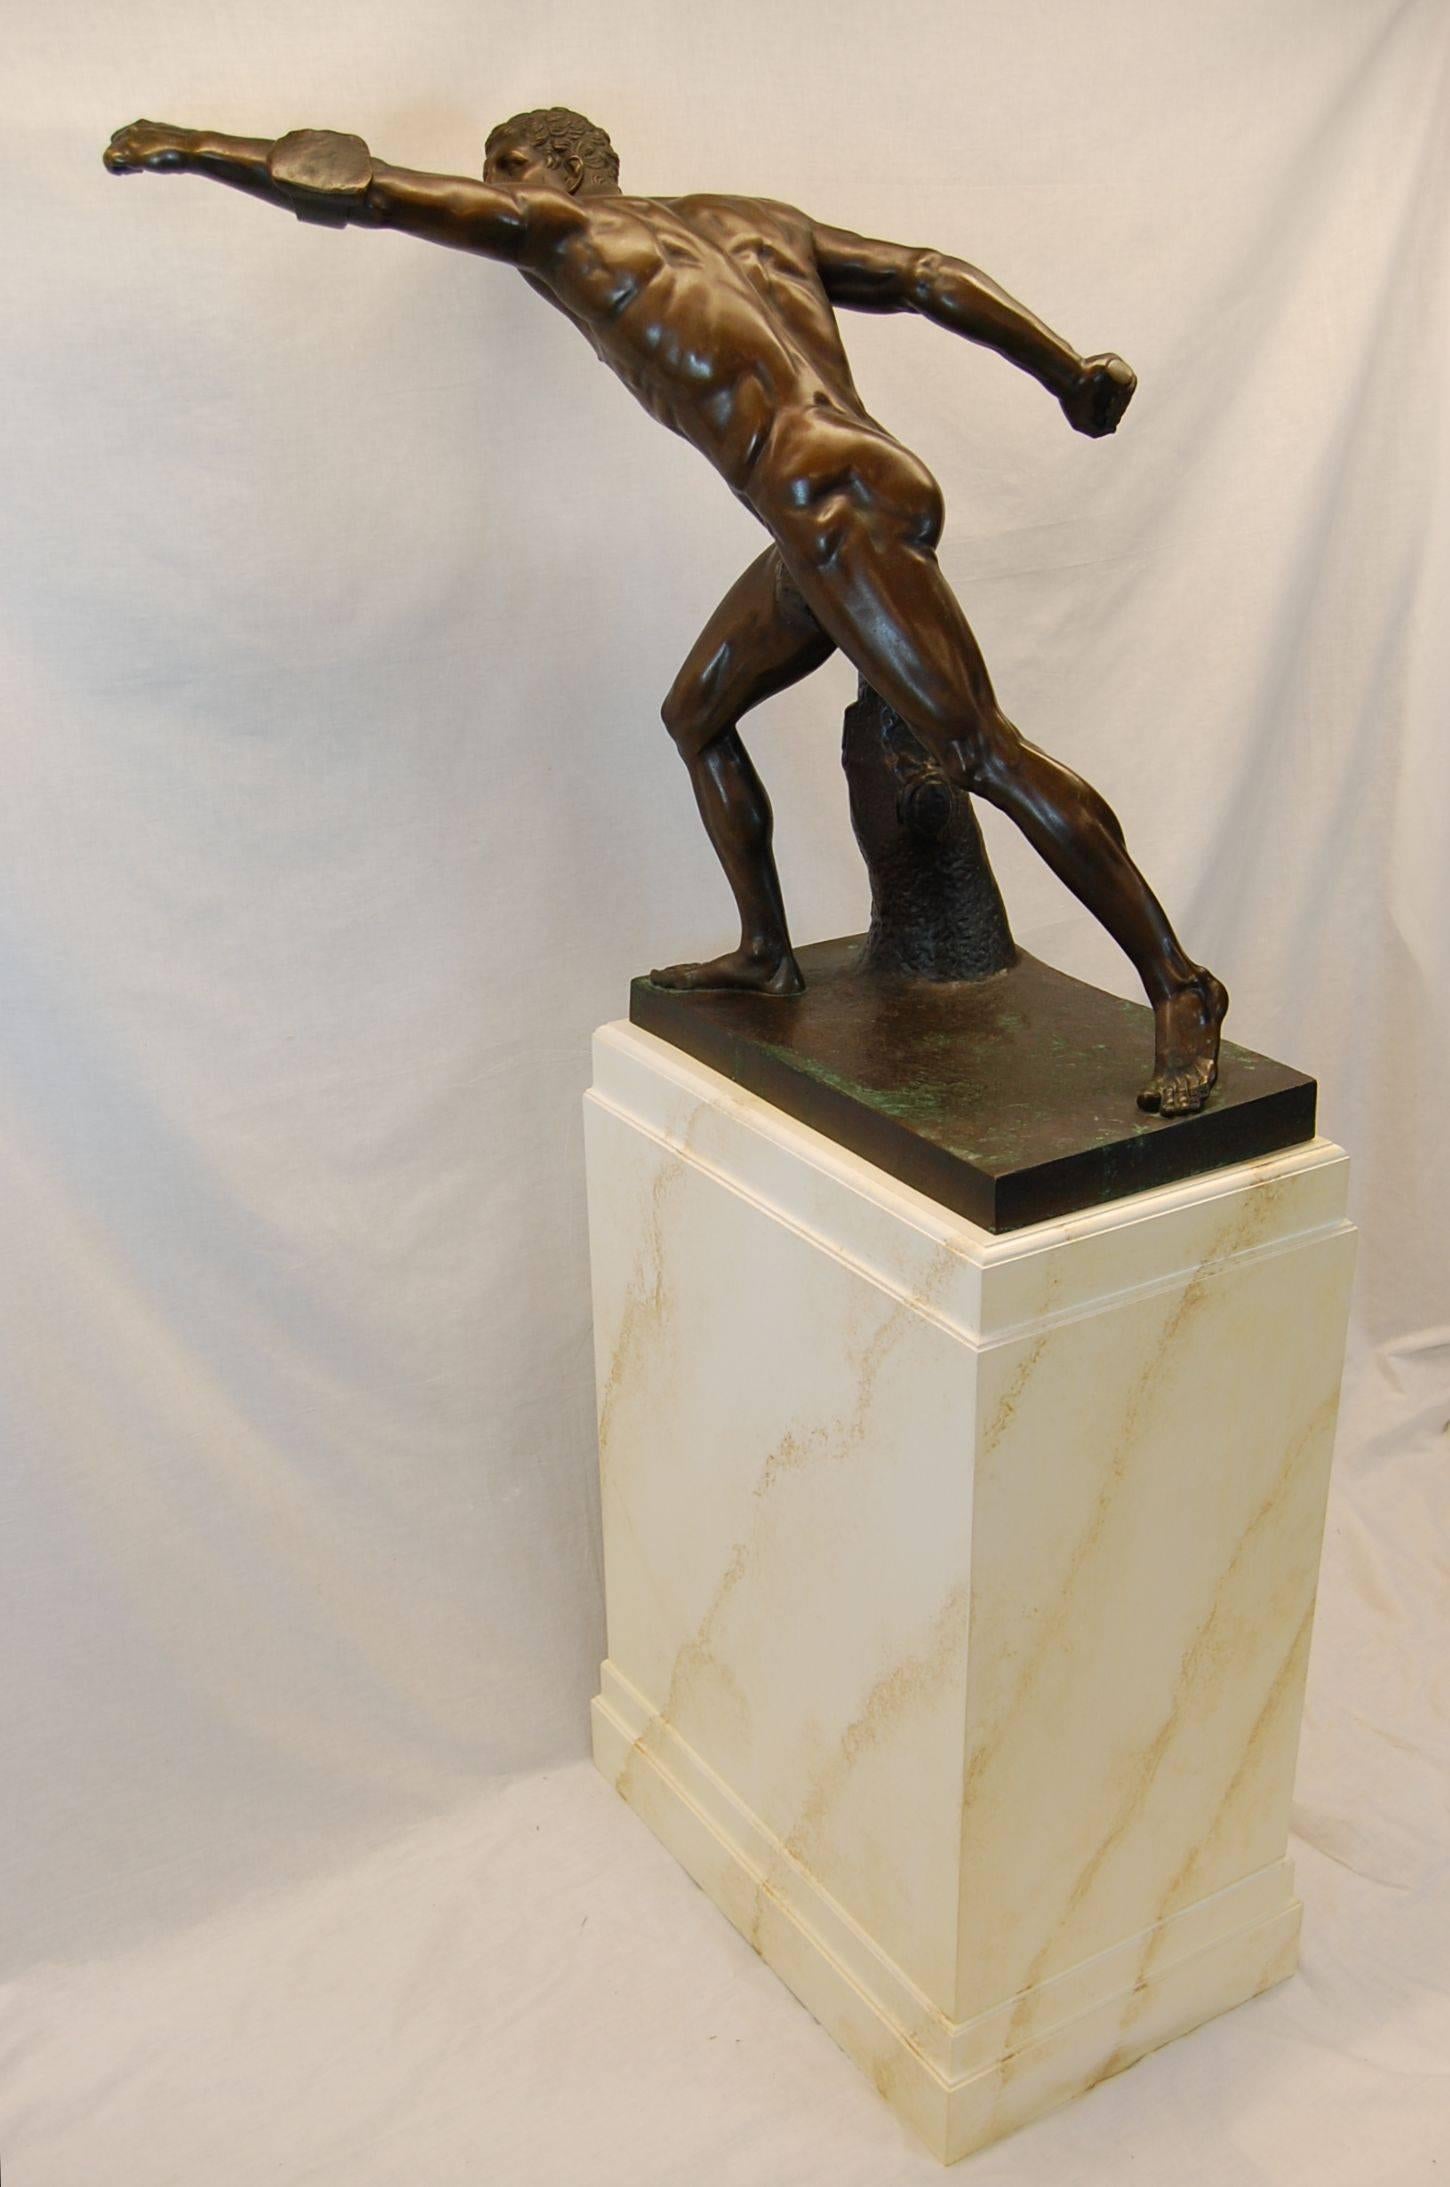 Hand-Crafted 19th Century Bronze Sculpture of the Borghese Gladiator, Tiffany & Co.